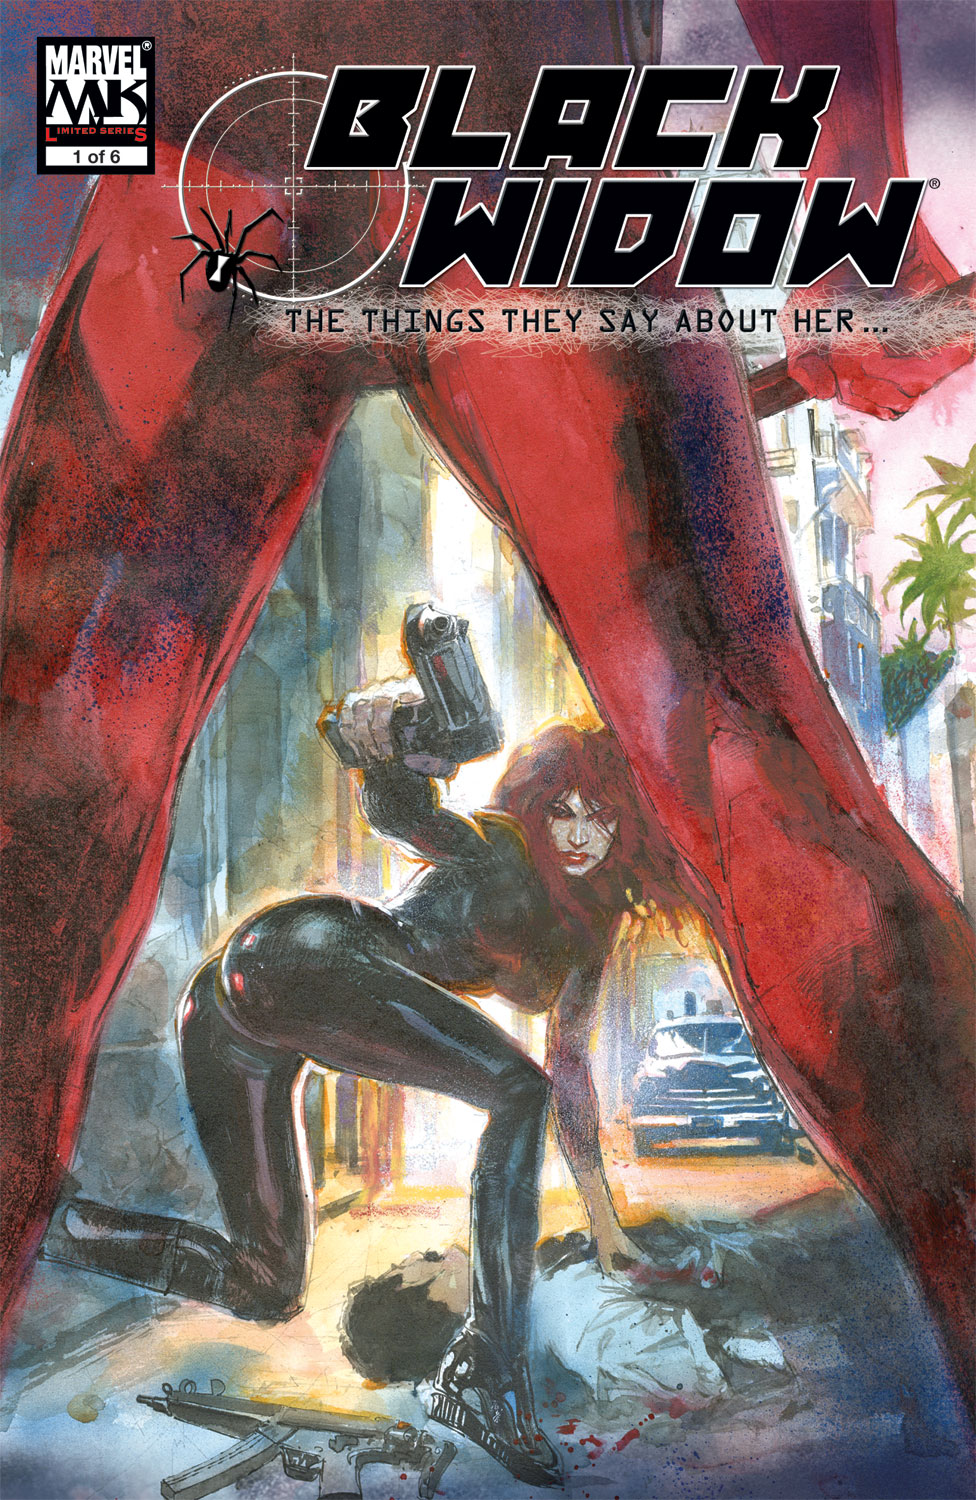 Black Widow: The Things They Say About Her (2005) #1